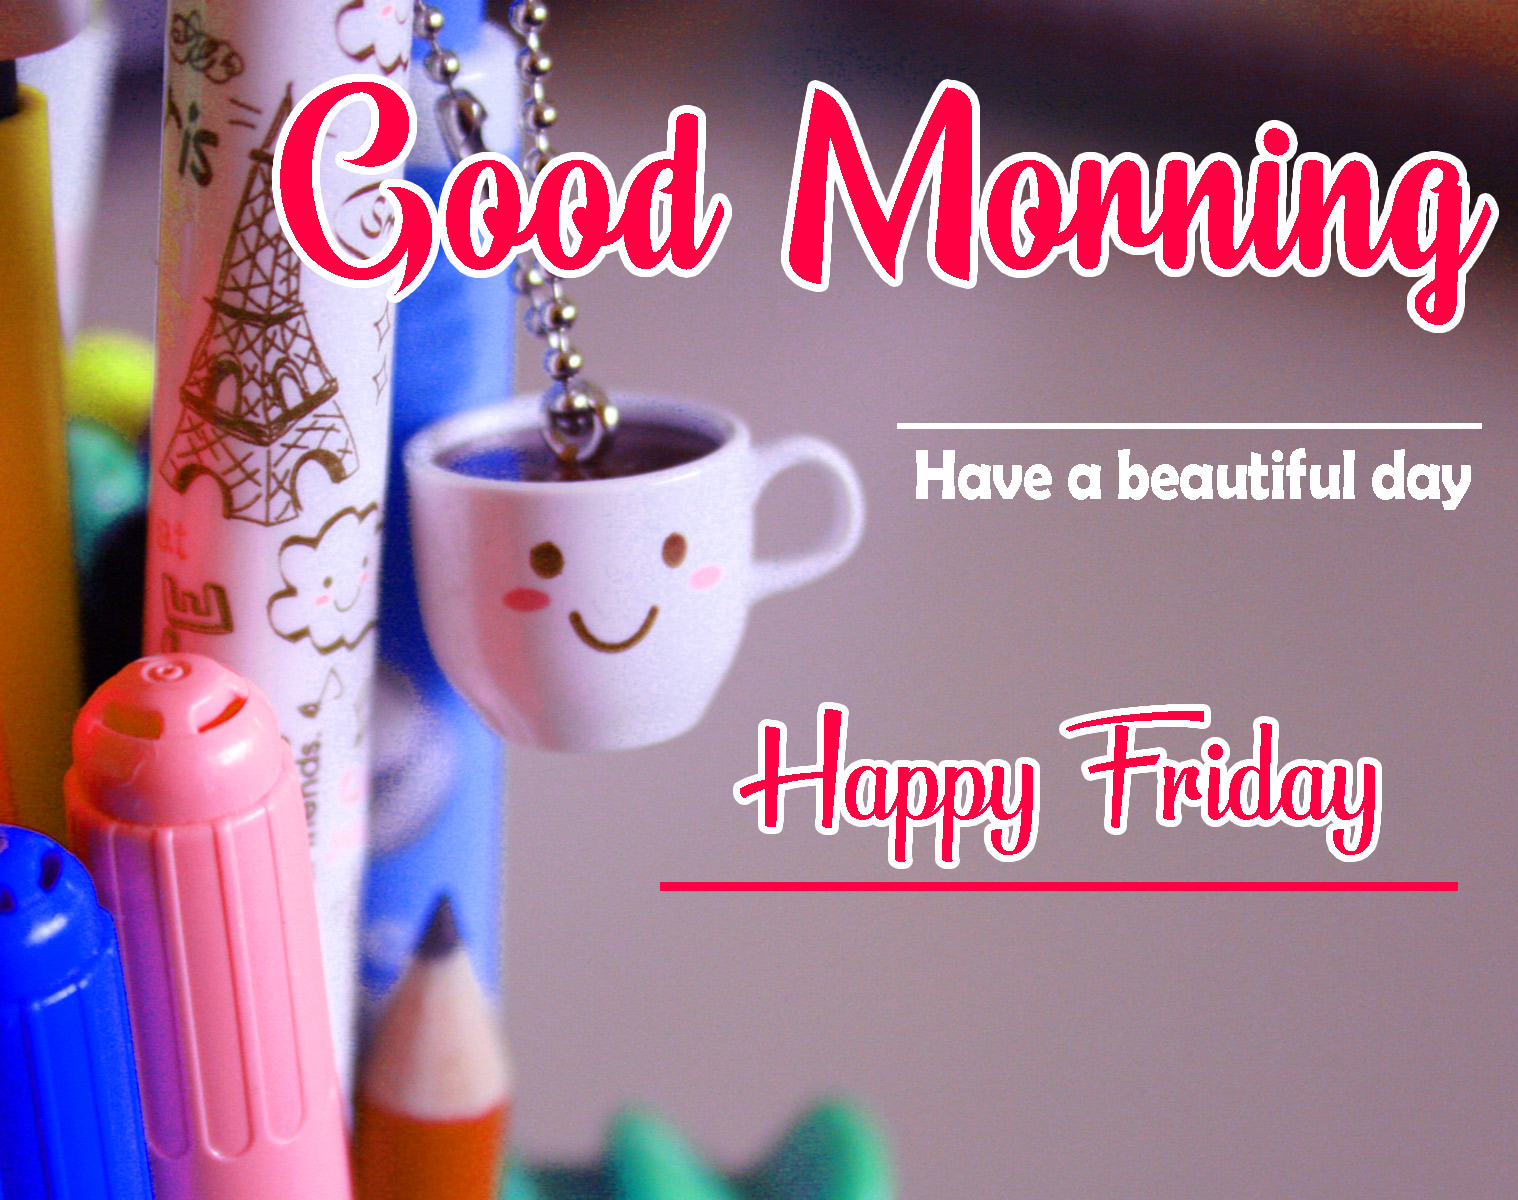 friday good morning Images pictures free